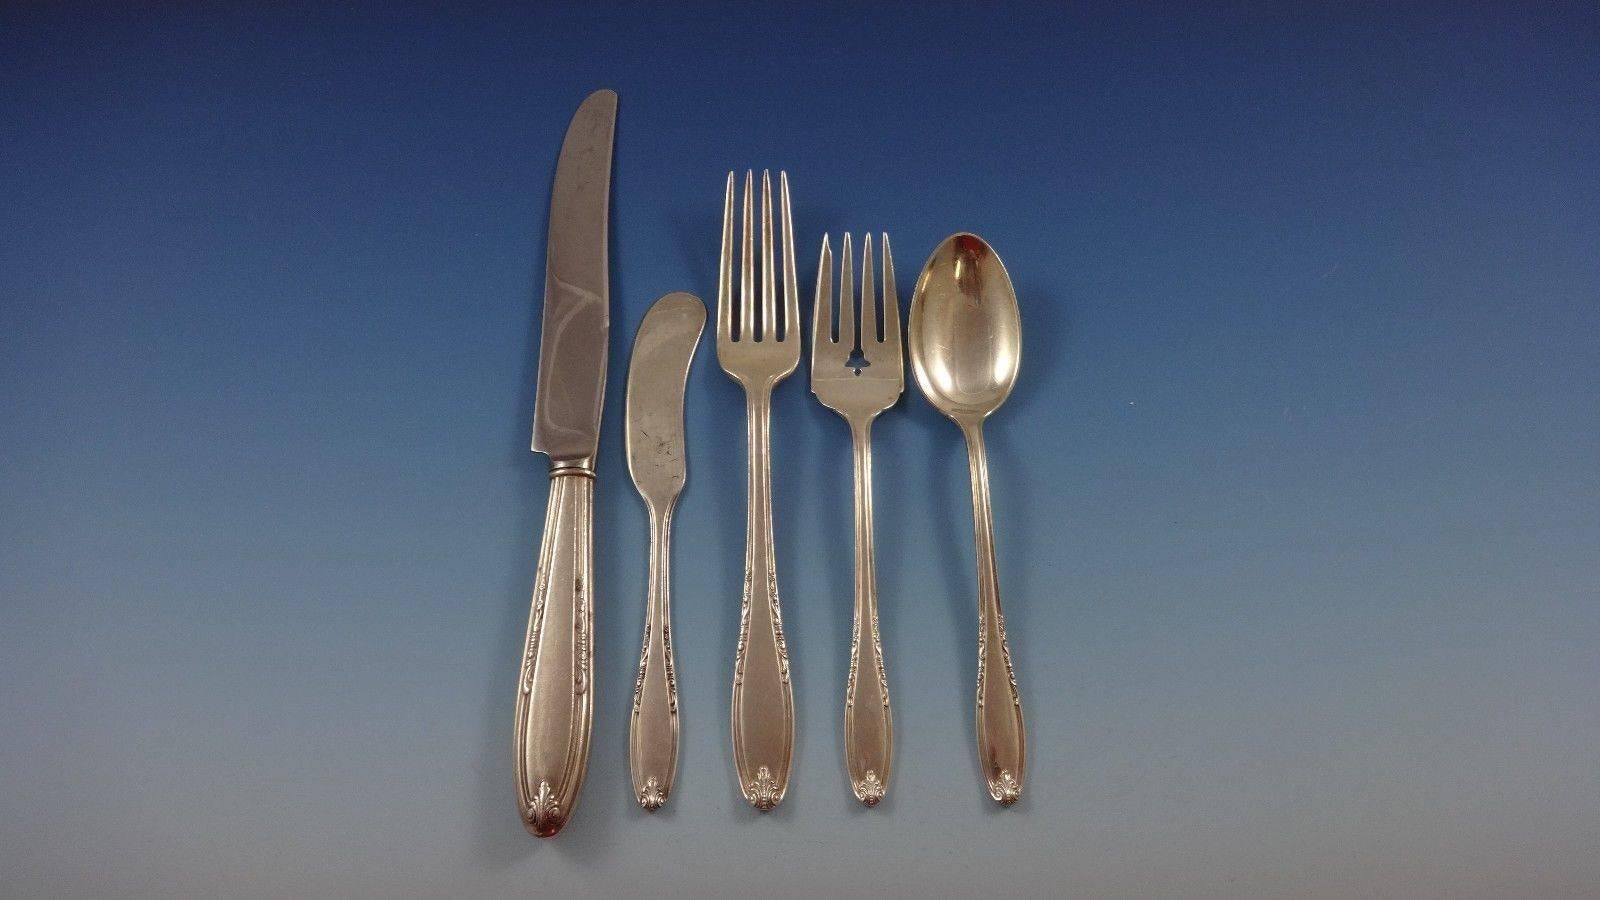 LEONORE BY MANCHESTER Sterling Silver flatware set - 30 pieces. Great starter set! 

This set includes:

6 KNIVES, 8 3/4